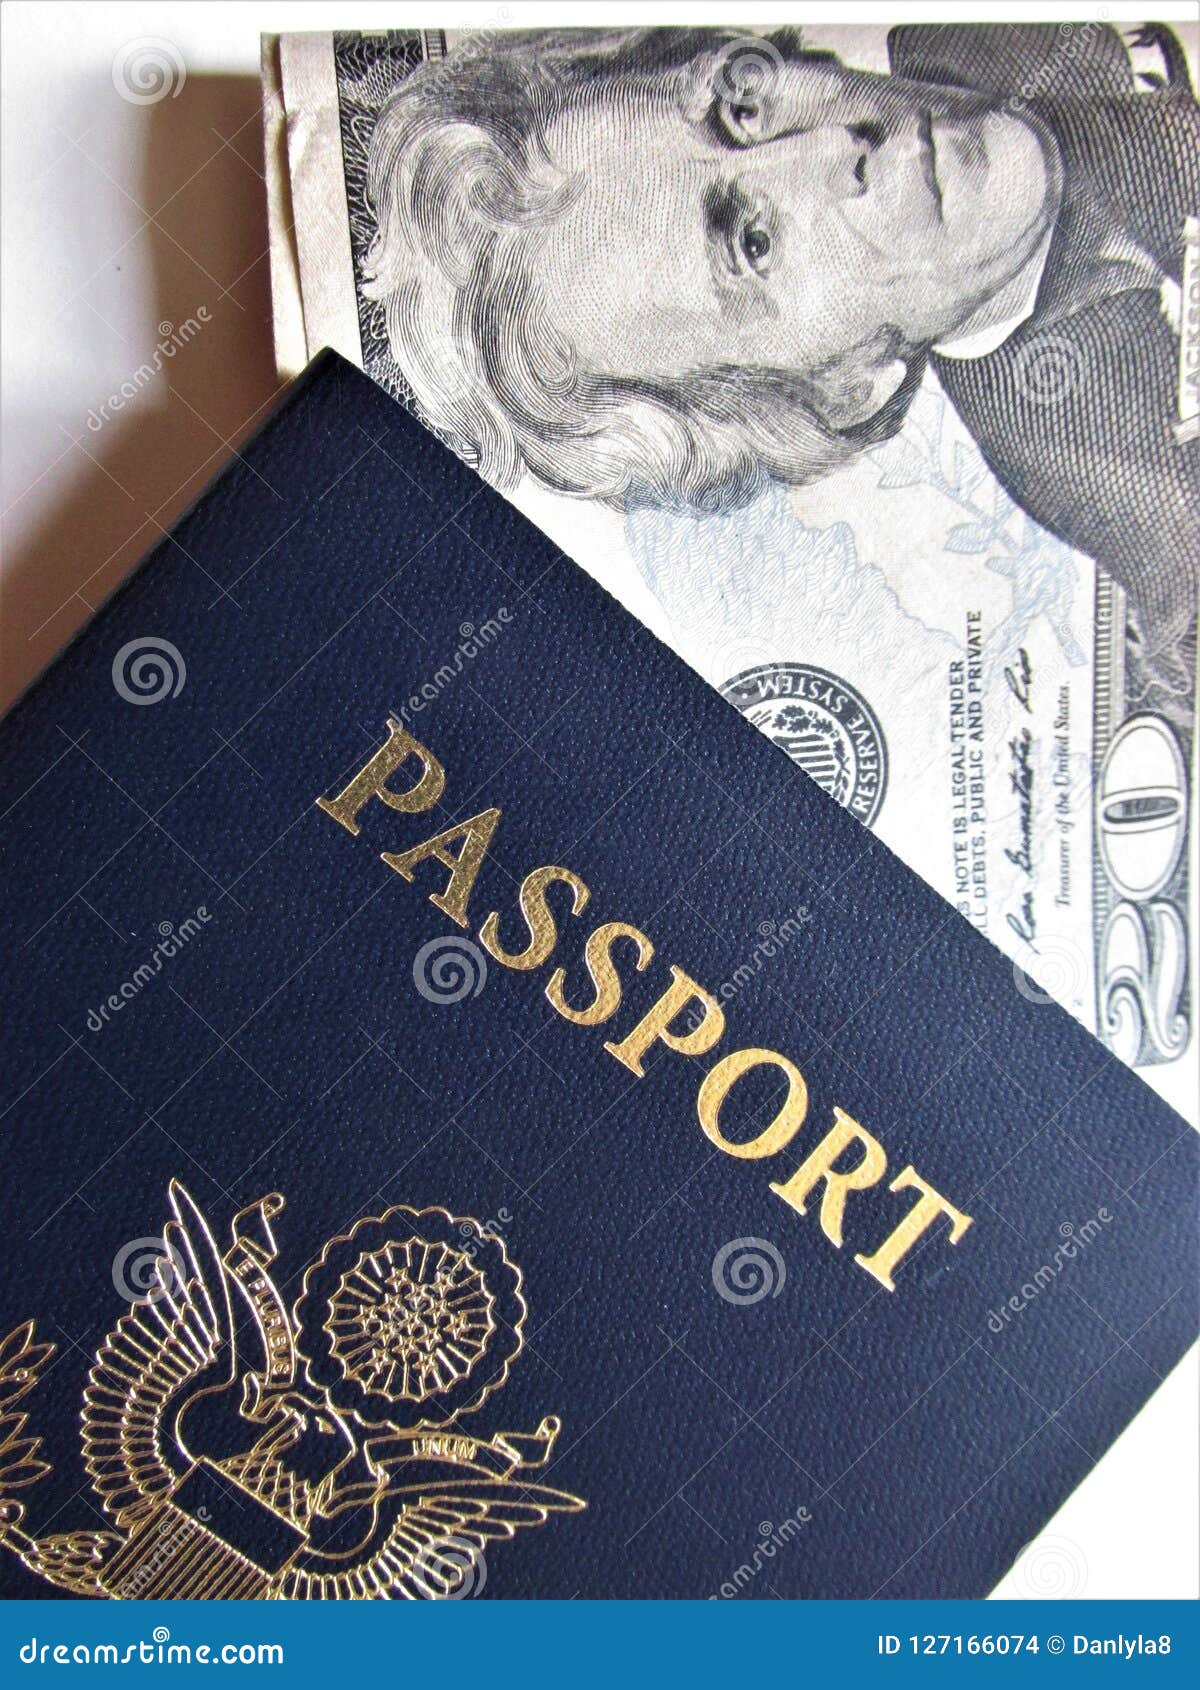 travel or turism concept. american passport. opened passport with visa stamps.